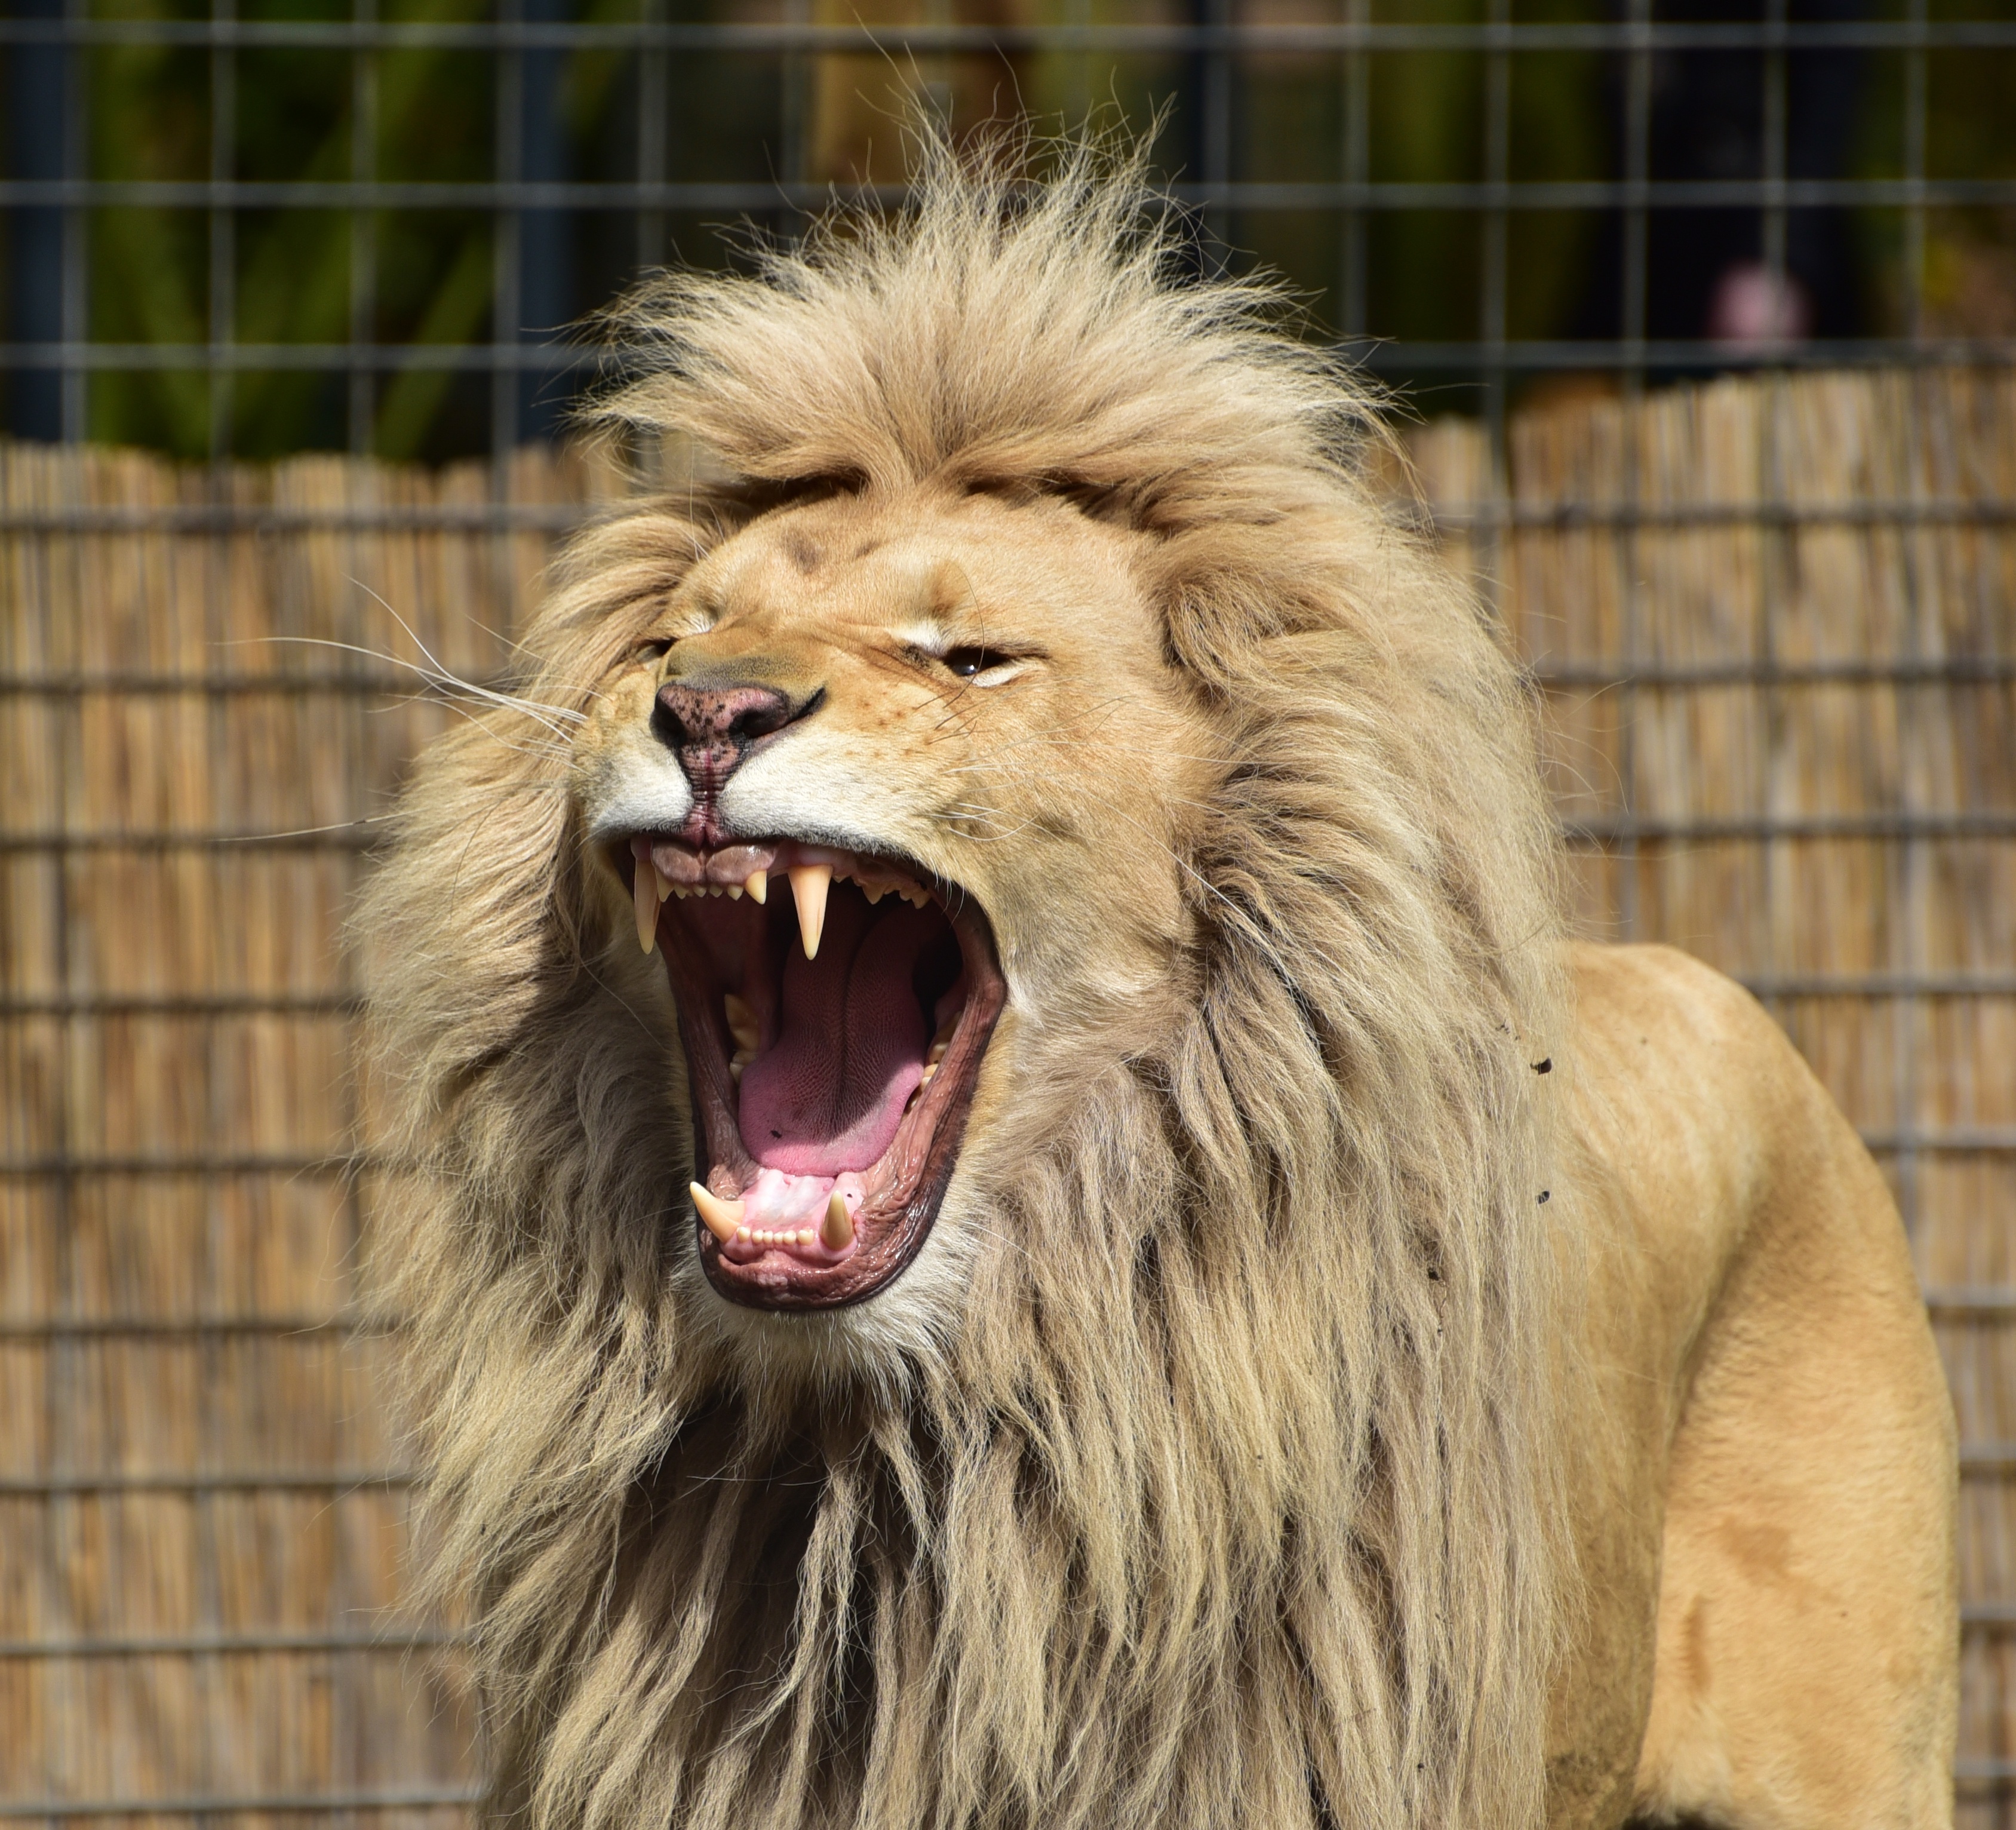 The lion yawns with his mouth wide open